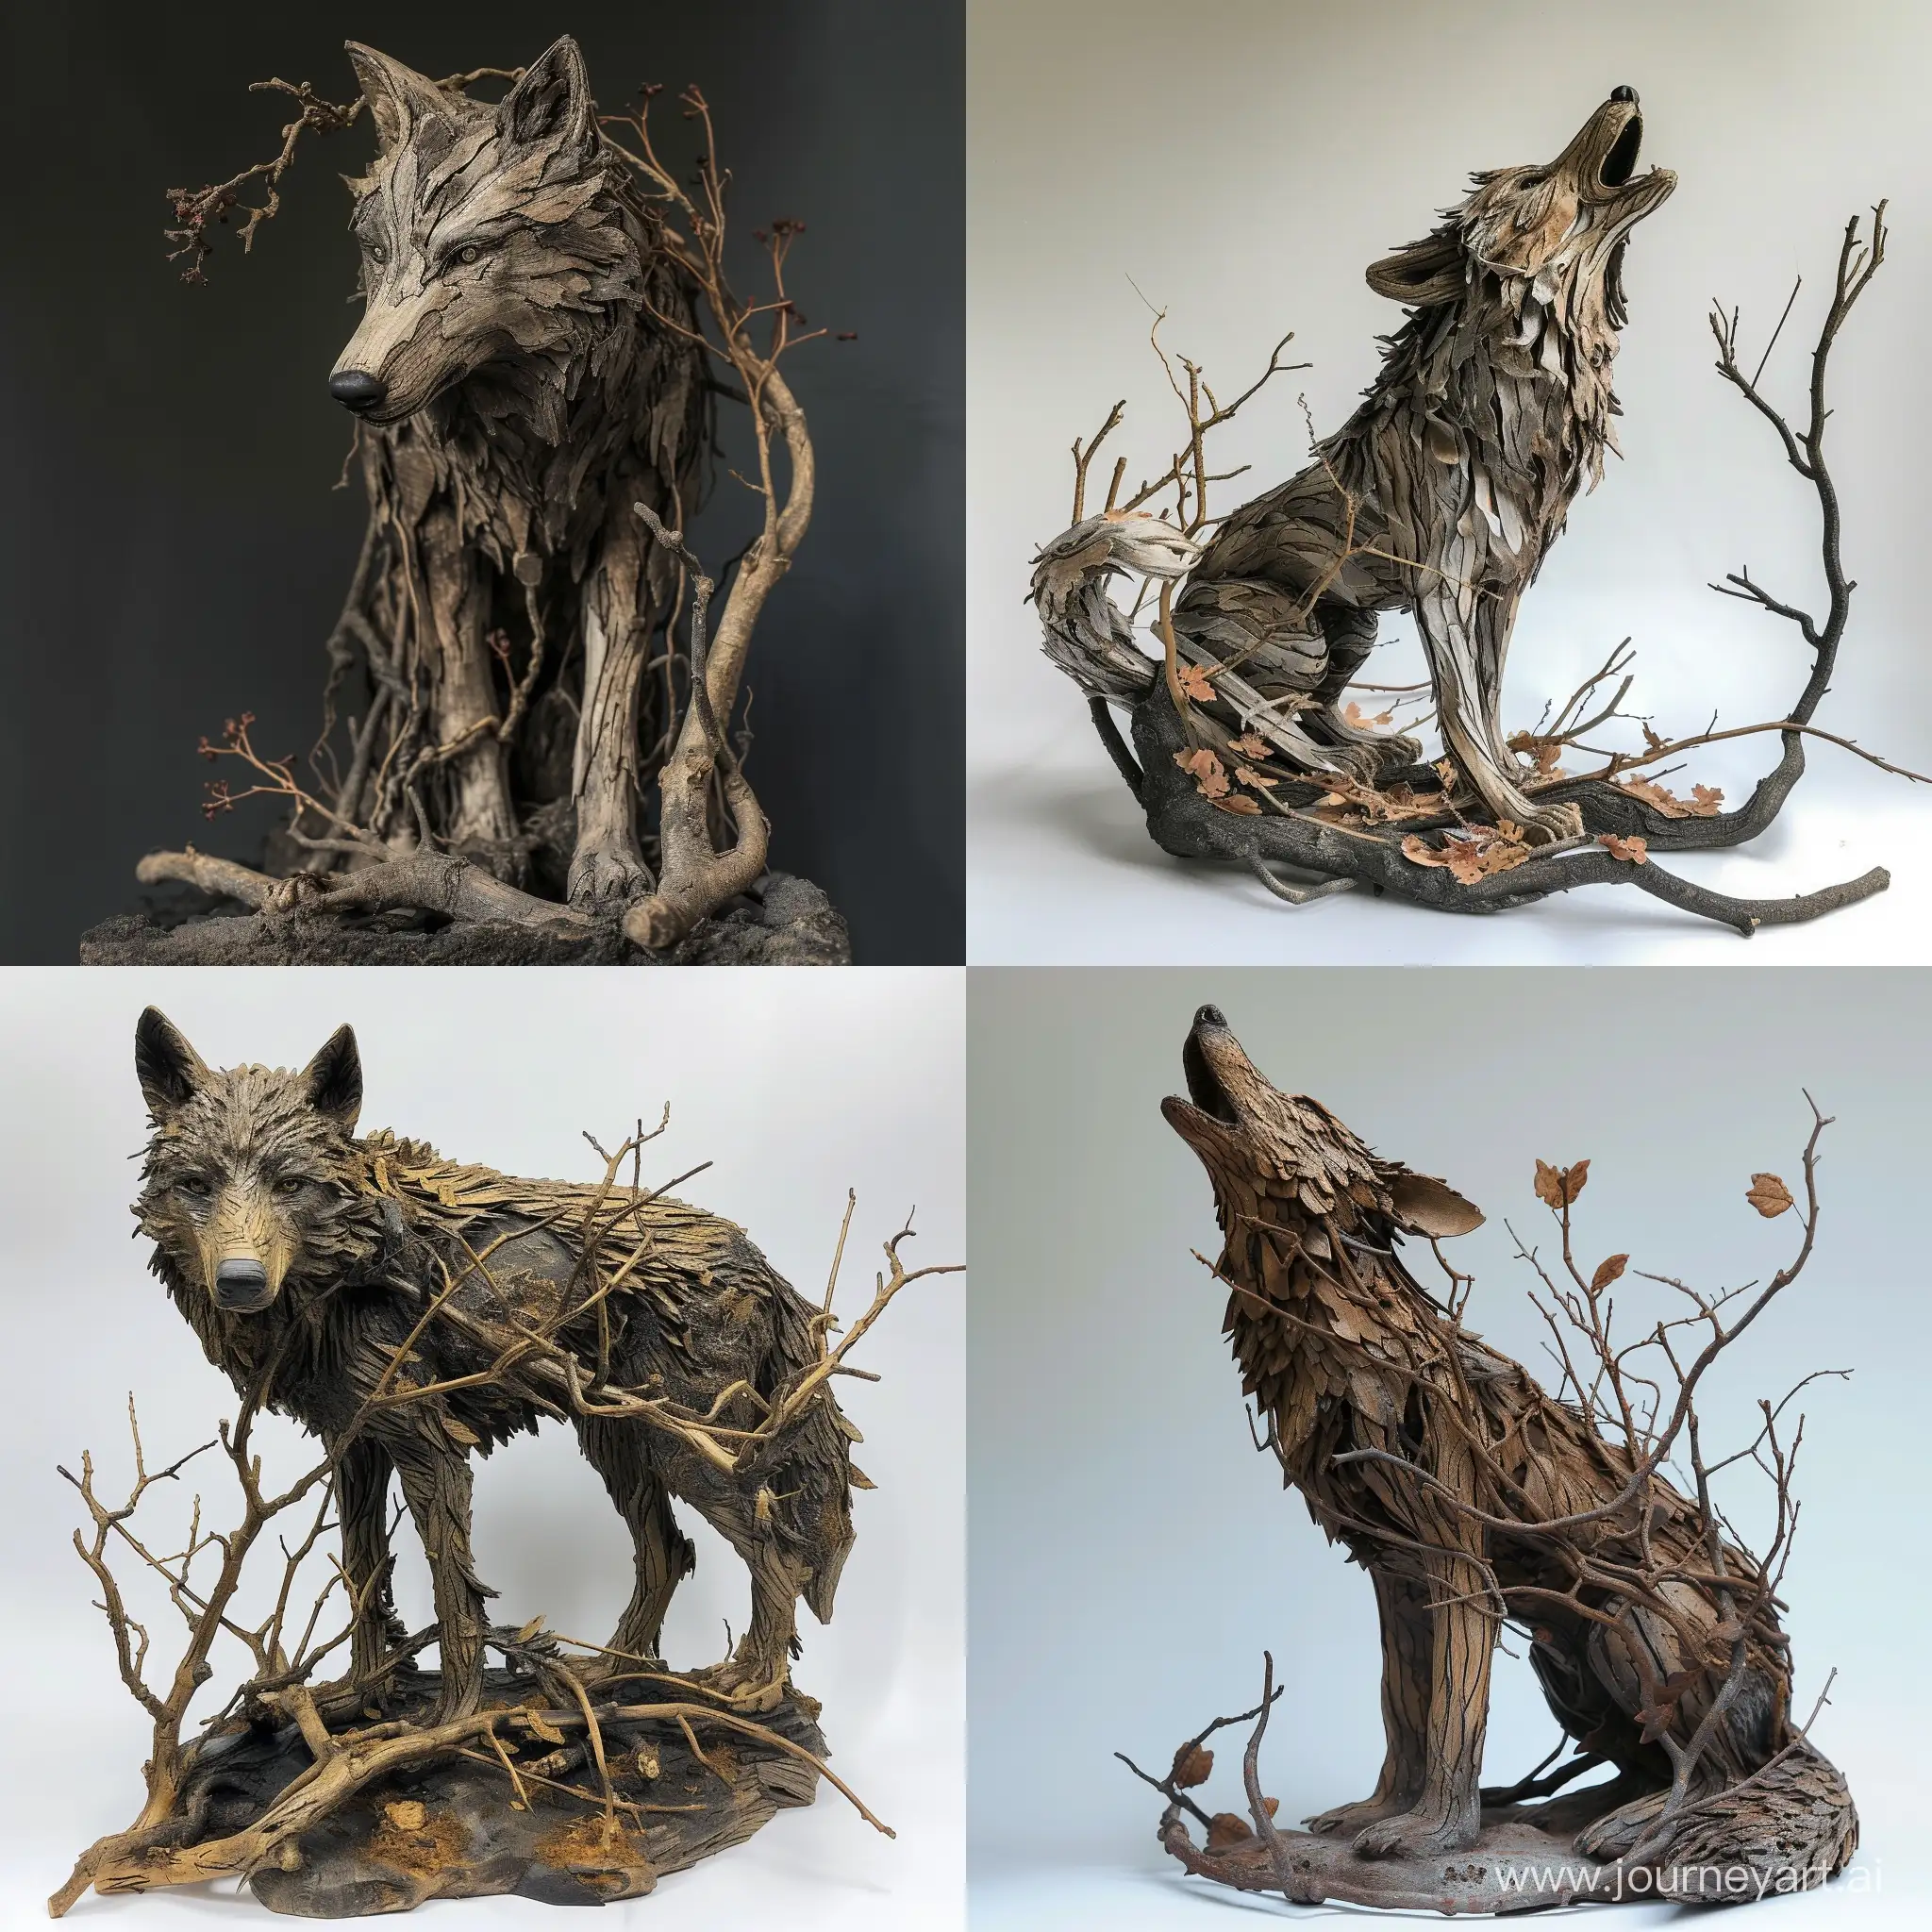 Dark-Fantasy-Wolf-Statue-Sculpted-from-Wood-and-Branches